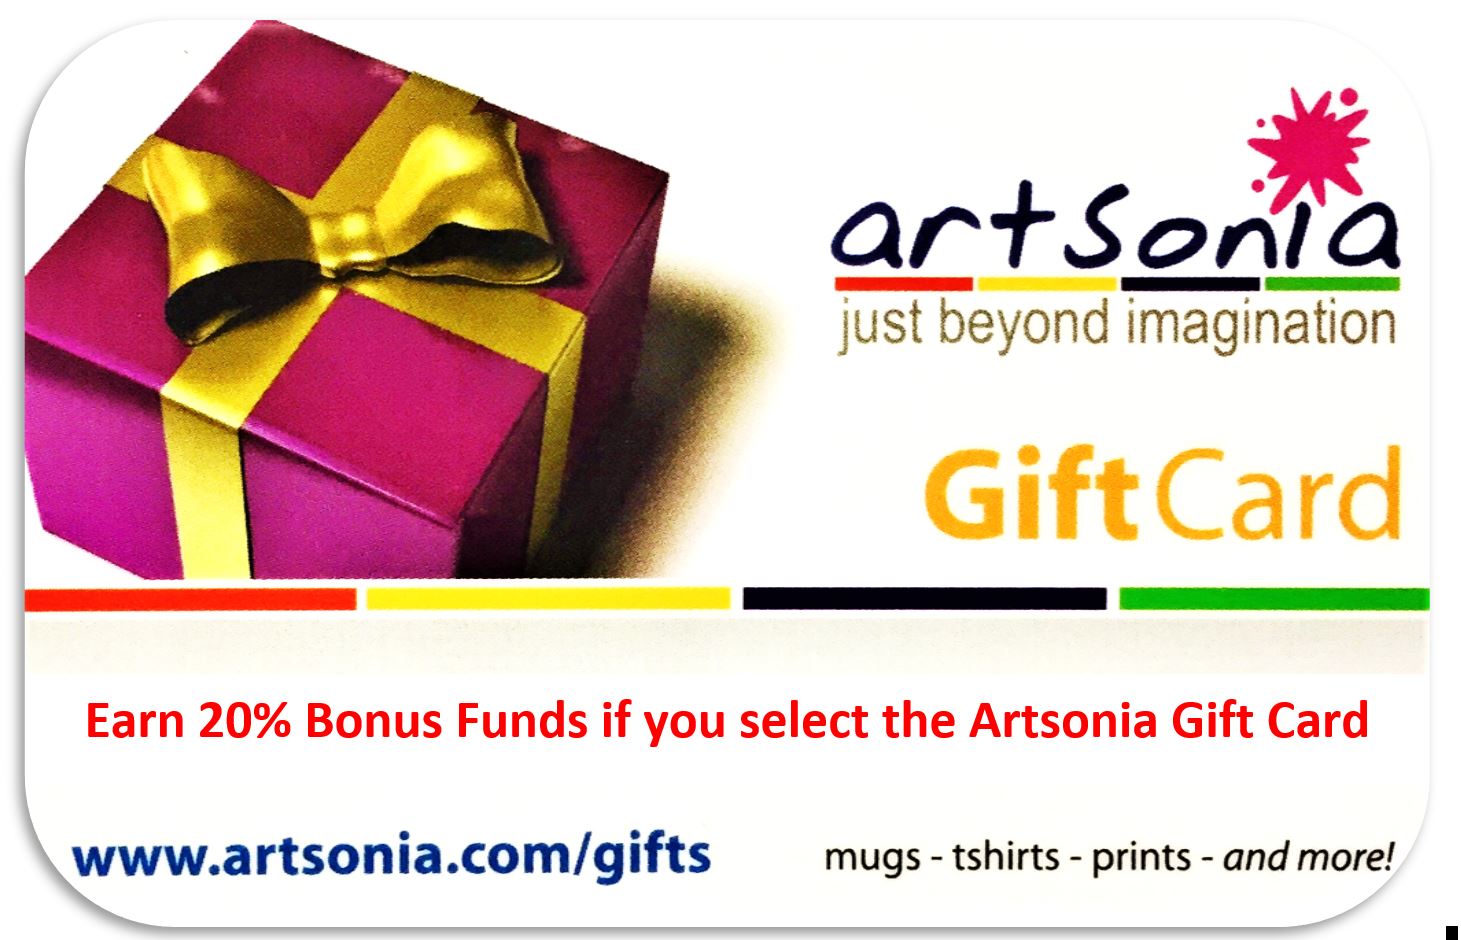 What are the Fundraising fund redemption options? Artsonia